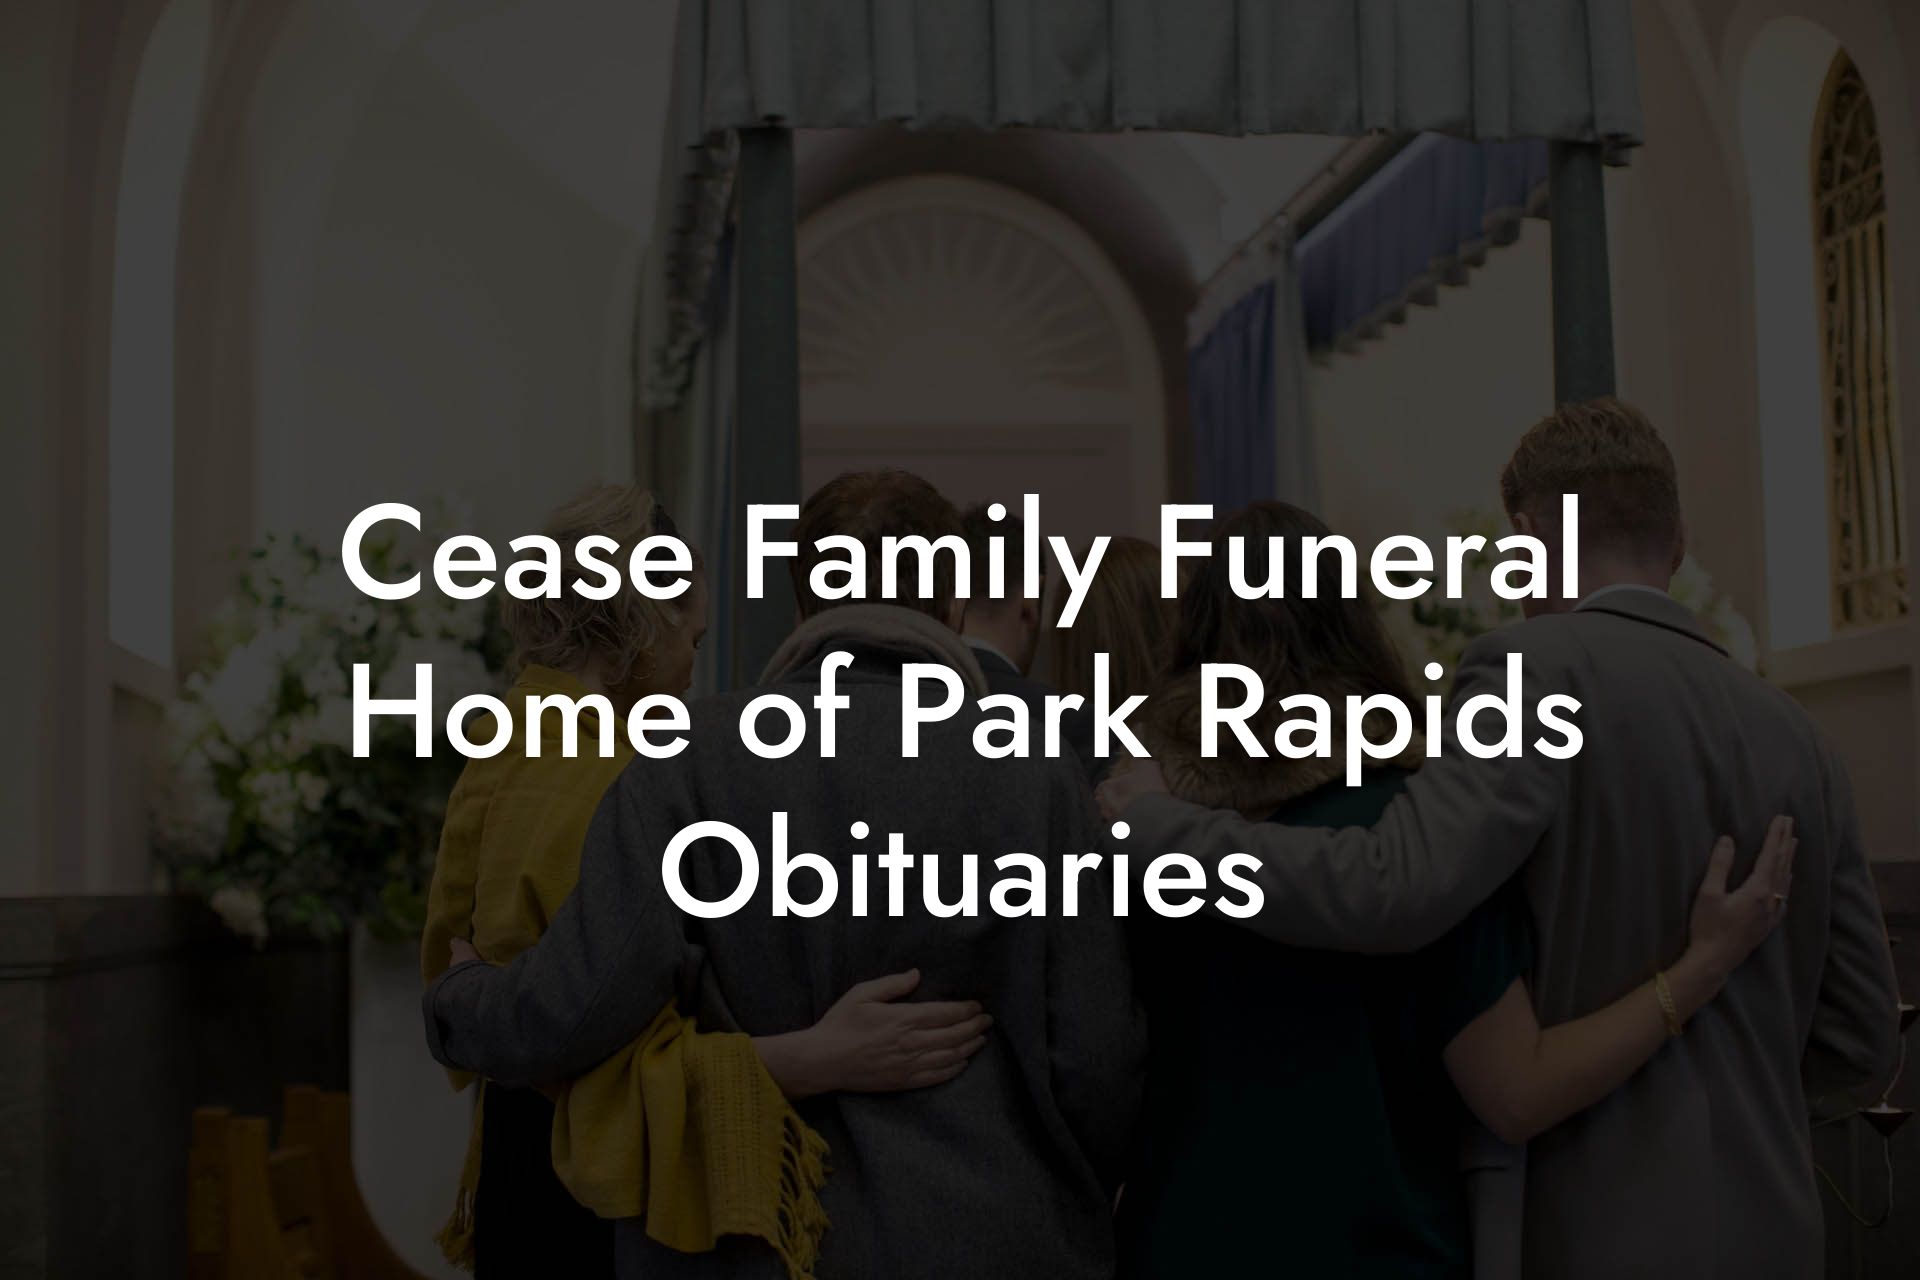 Cease Family Funeral Home of Park Rapids Obituaries